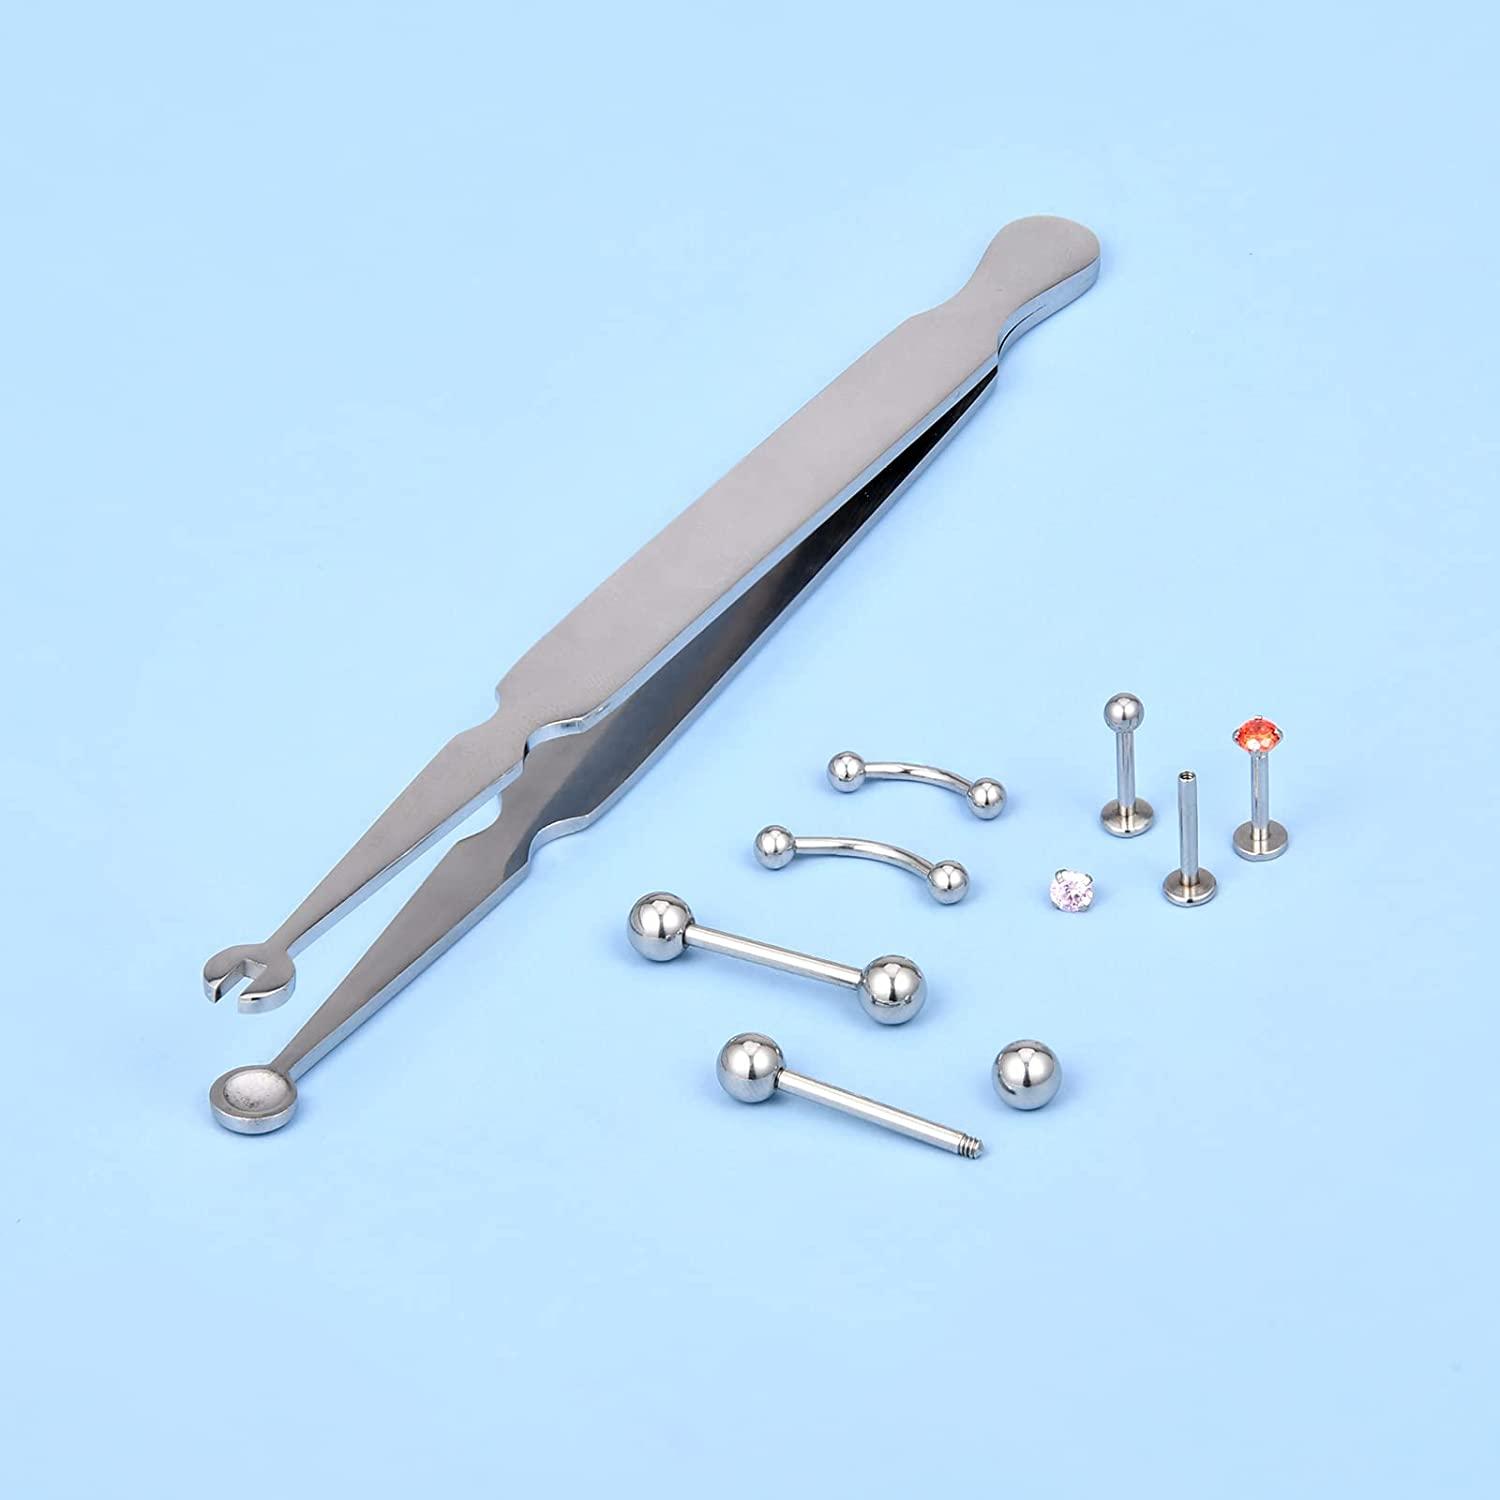 JIESIBAO Piercing Barbell Clamps,Piercing Forceps Pliers Surgical Steel  Catch Barbell Jewelry Clamp Tweezers for Tongue Rings Labret Cartilage  Earrings All Pierings A-lip/barbell clamps